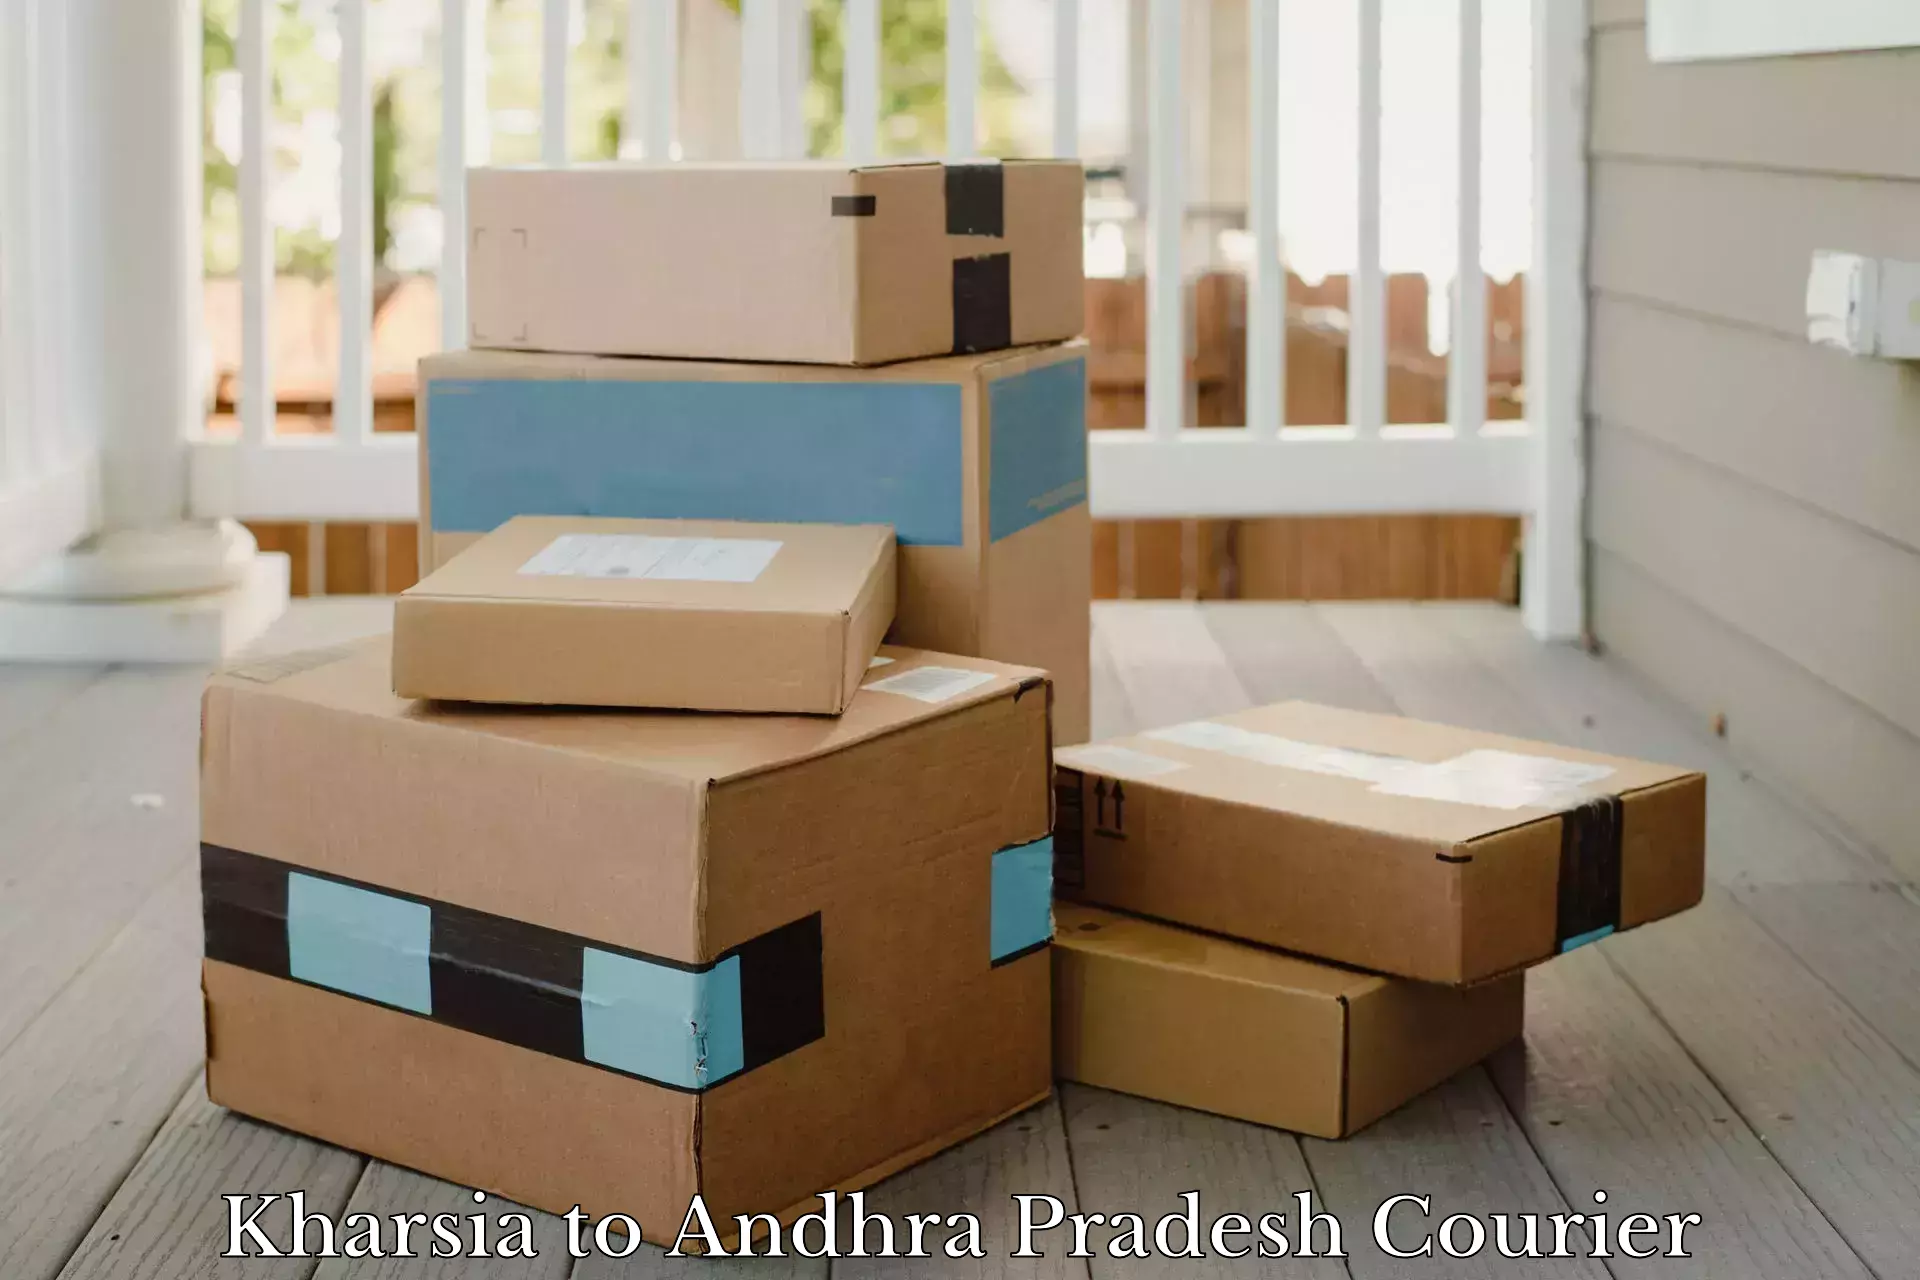 Package delivery network Kharsia to Visakhapatnam Port